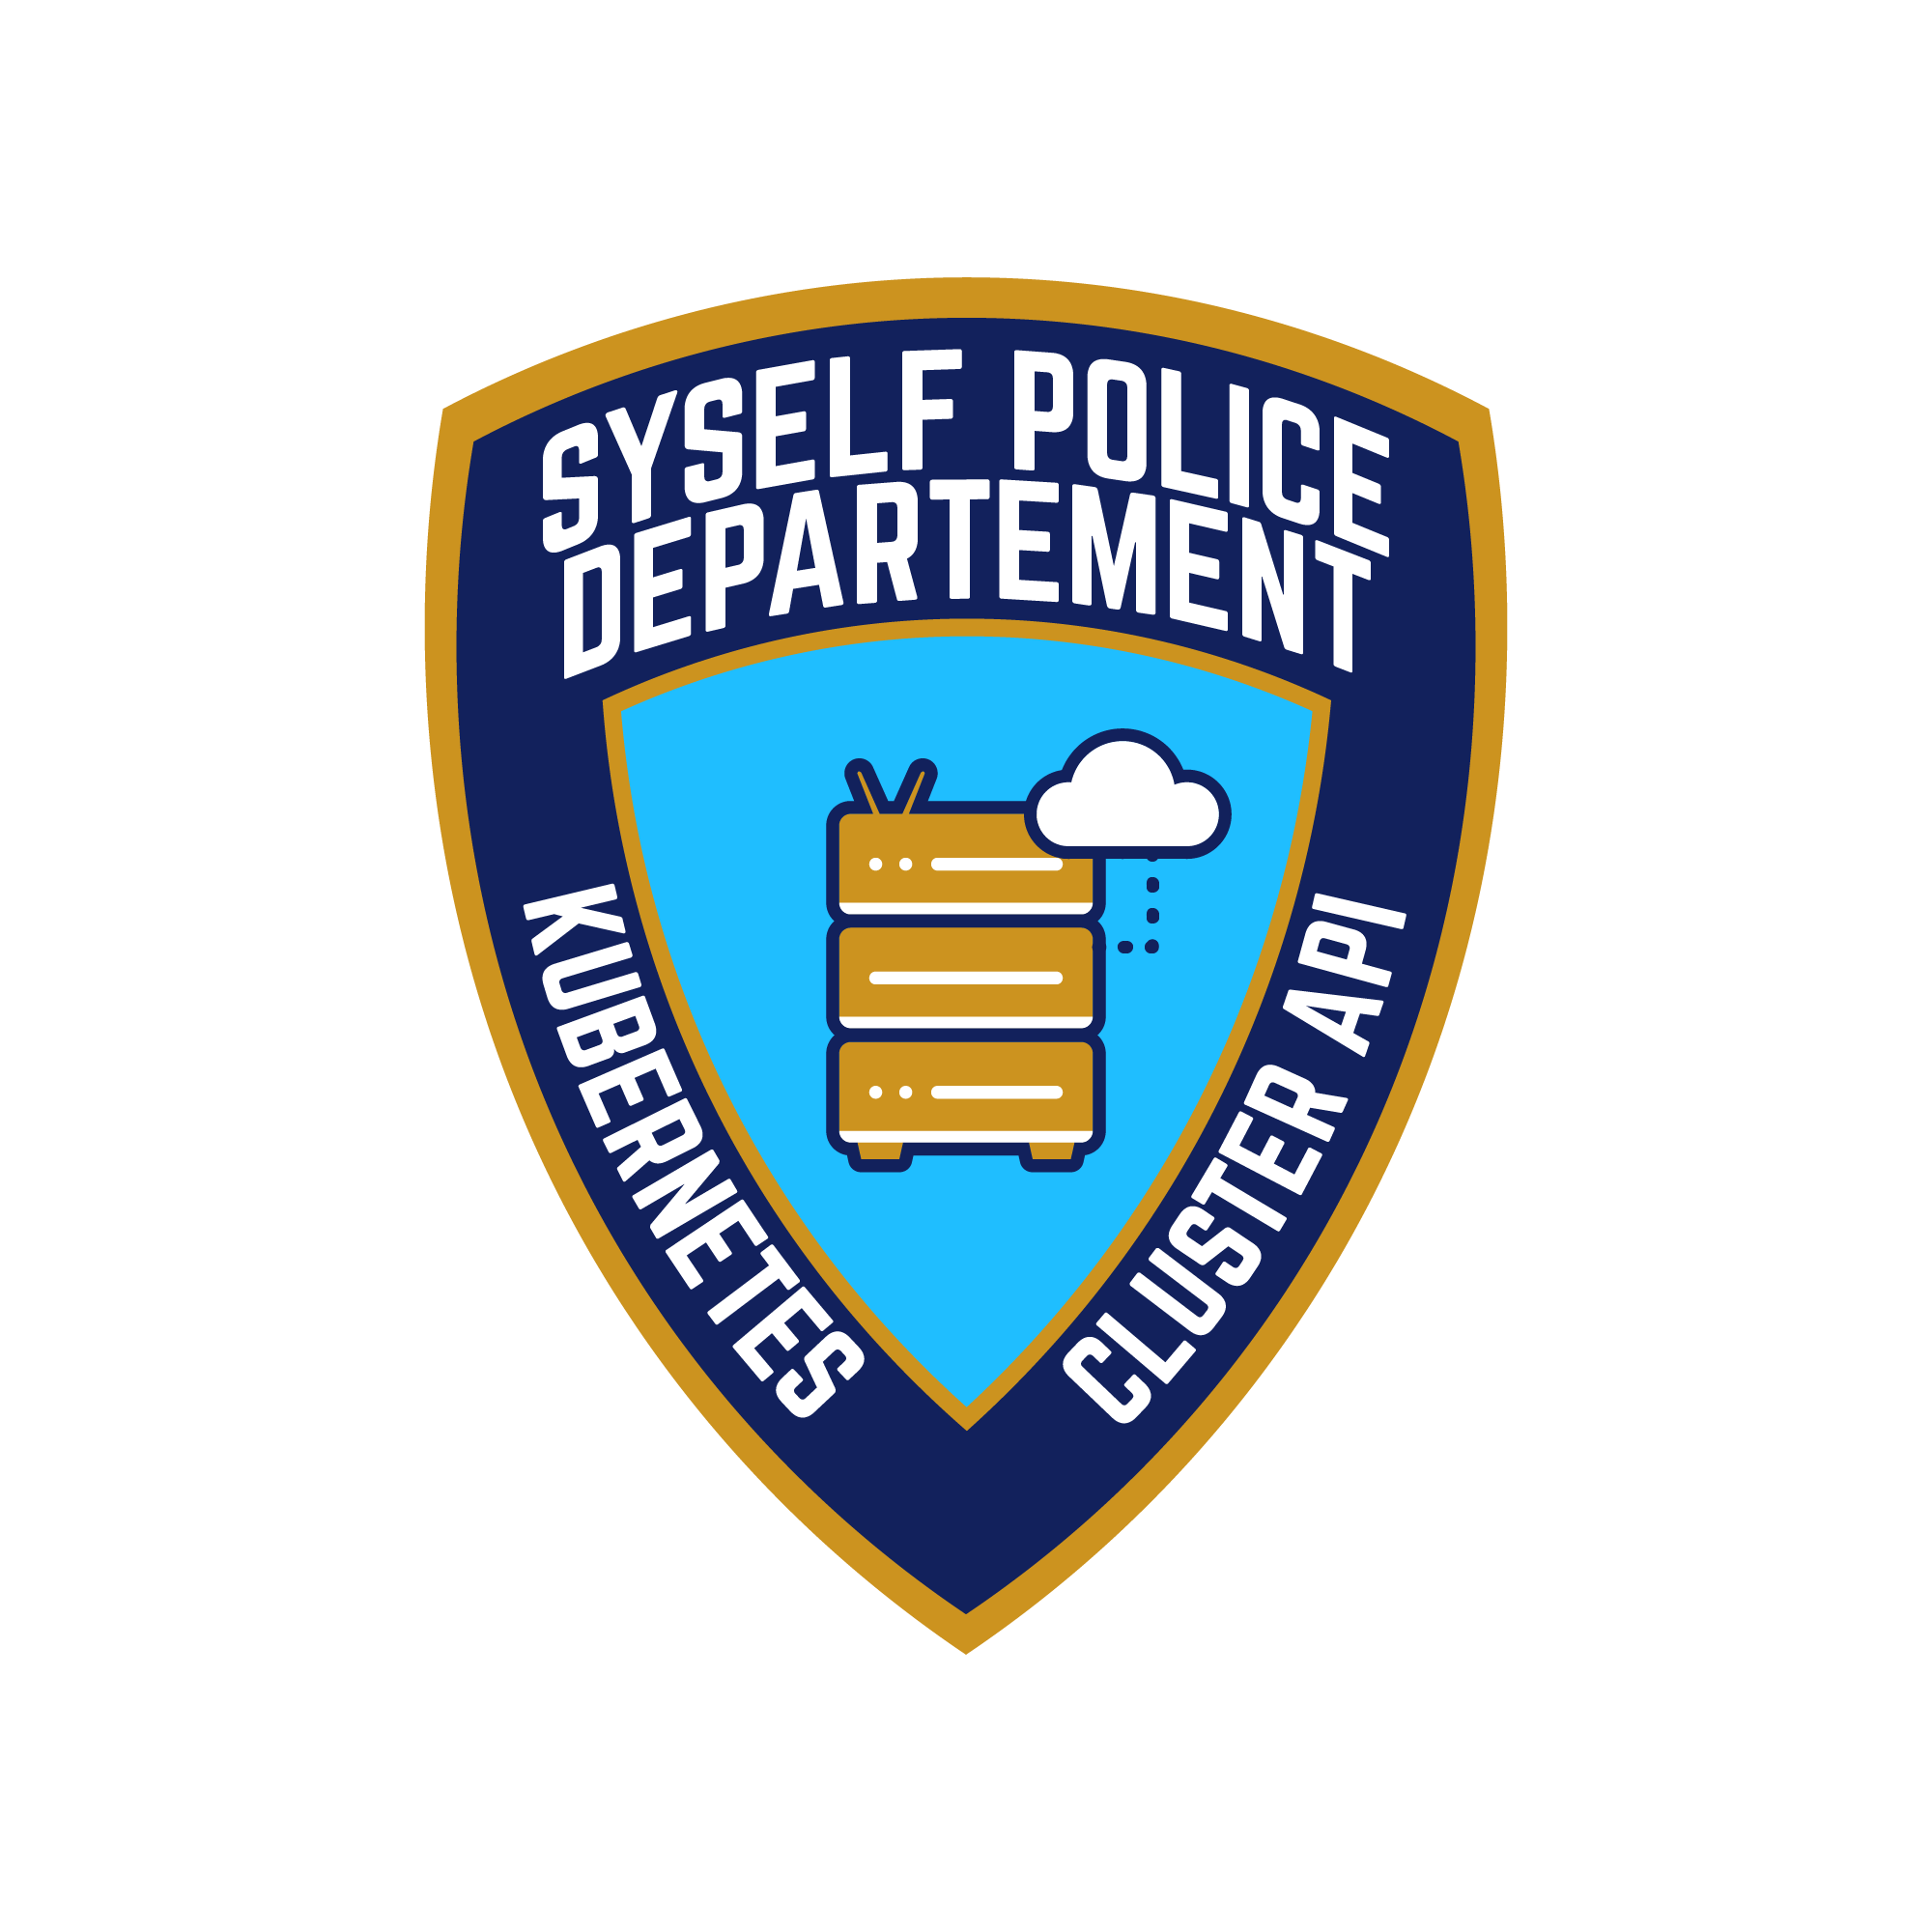 Badge of Syself Police Department with a stack of servers and a cloud icon in the middle.